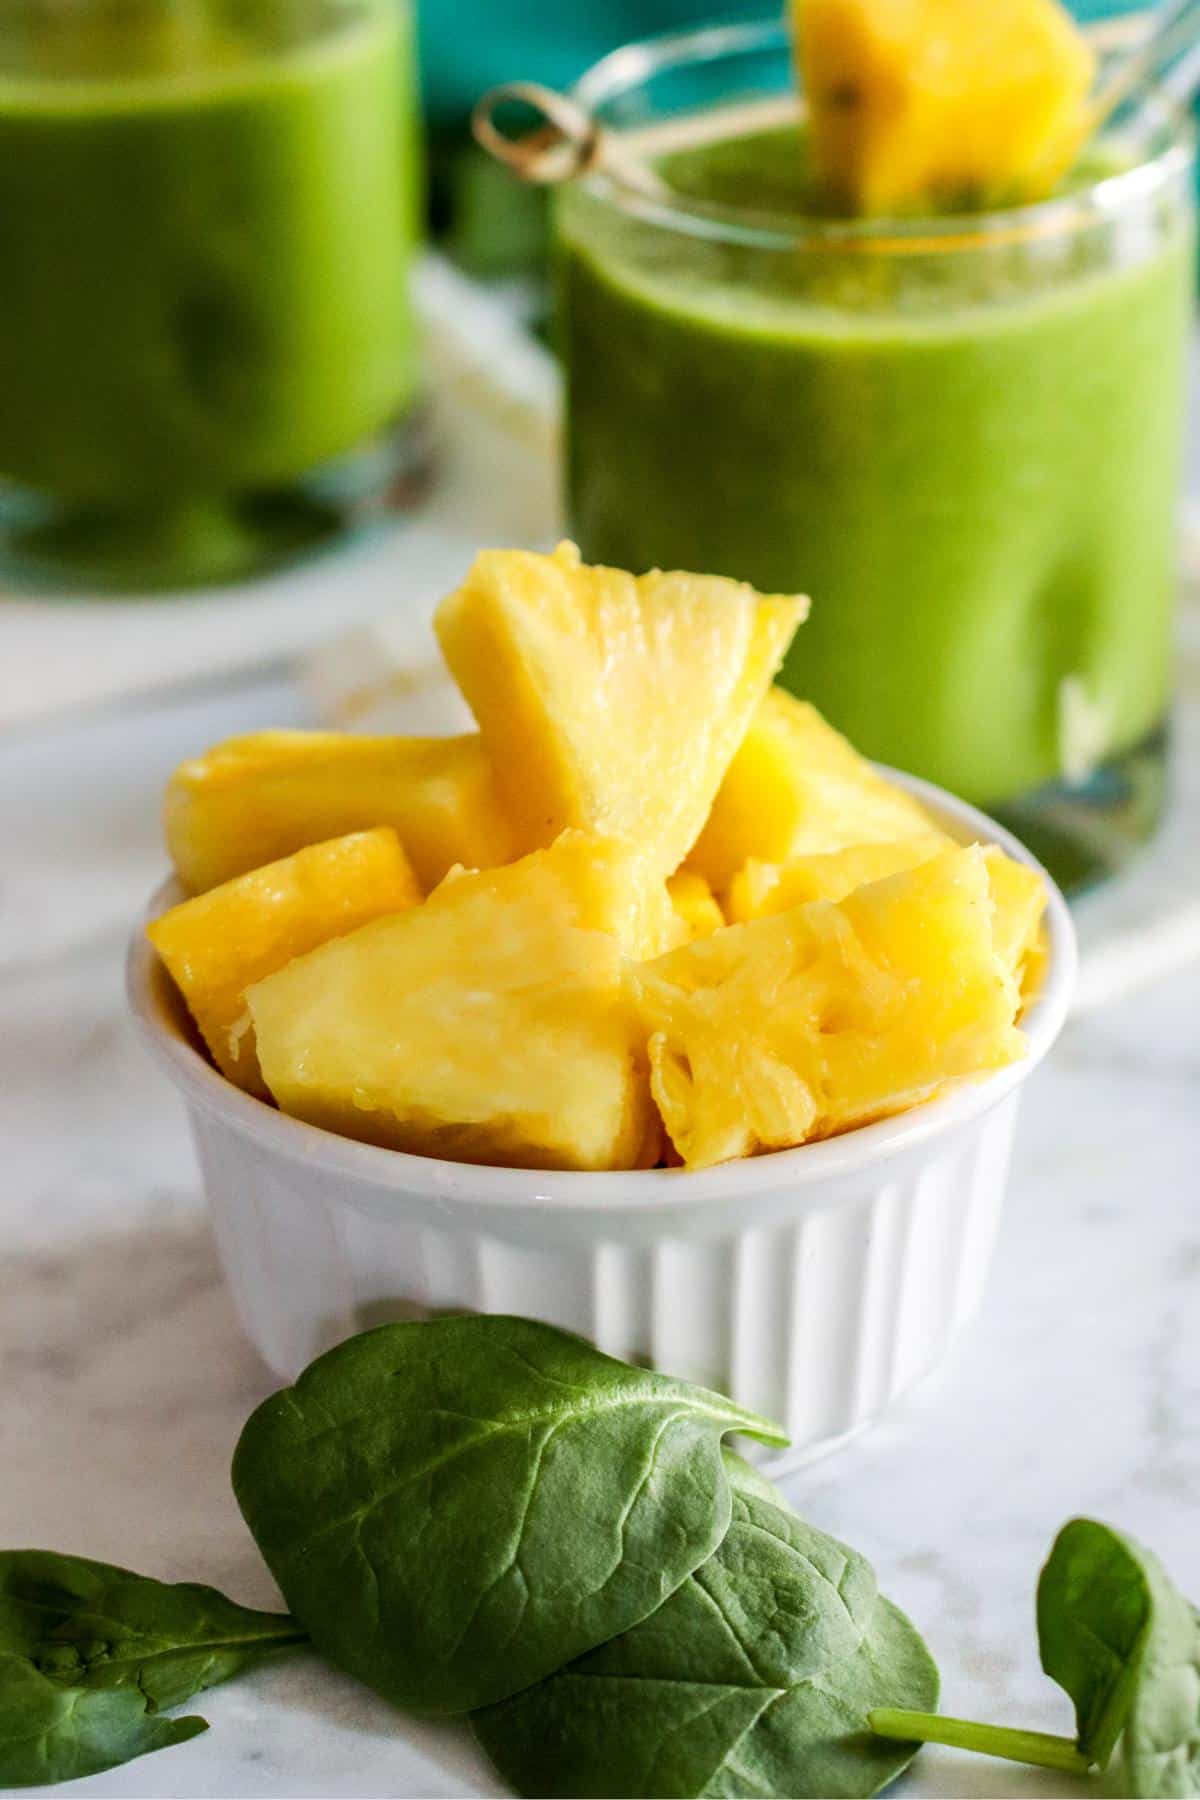 Baby spinach and a bowl of pineapple chunks.